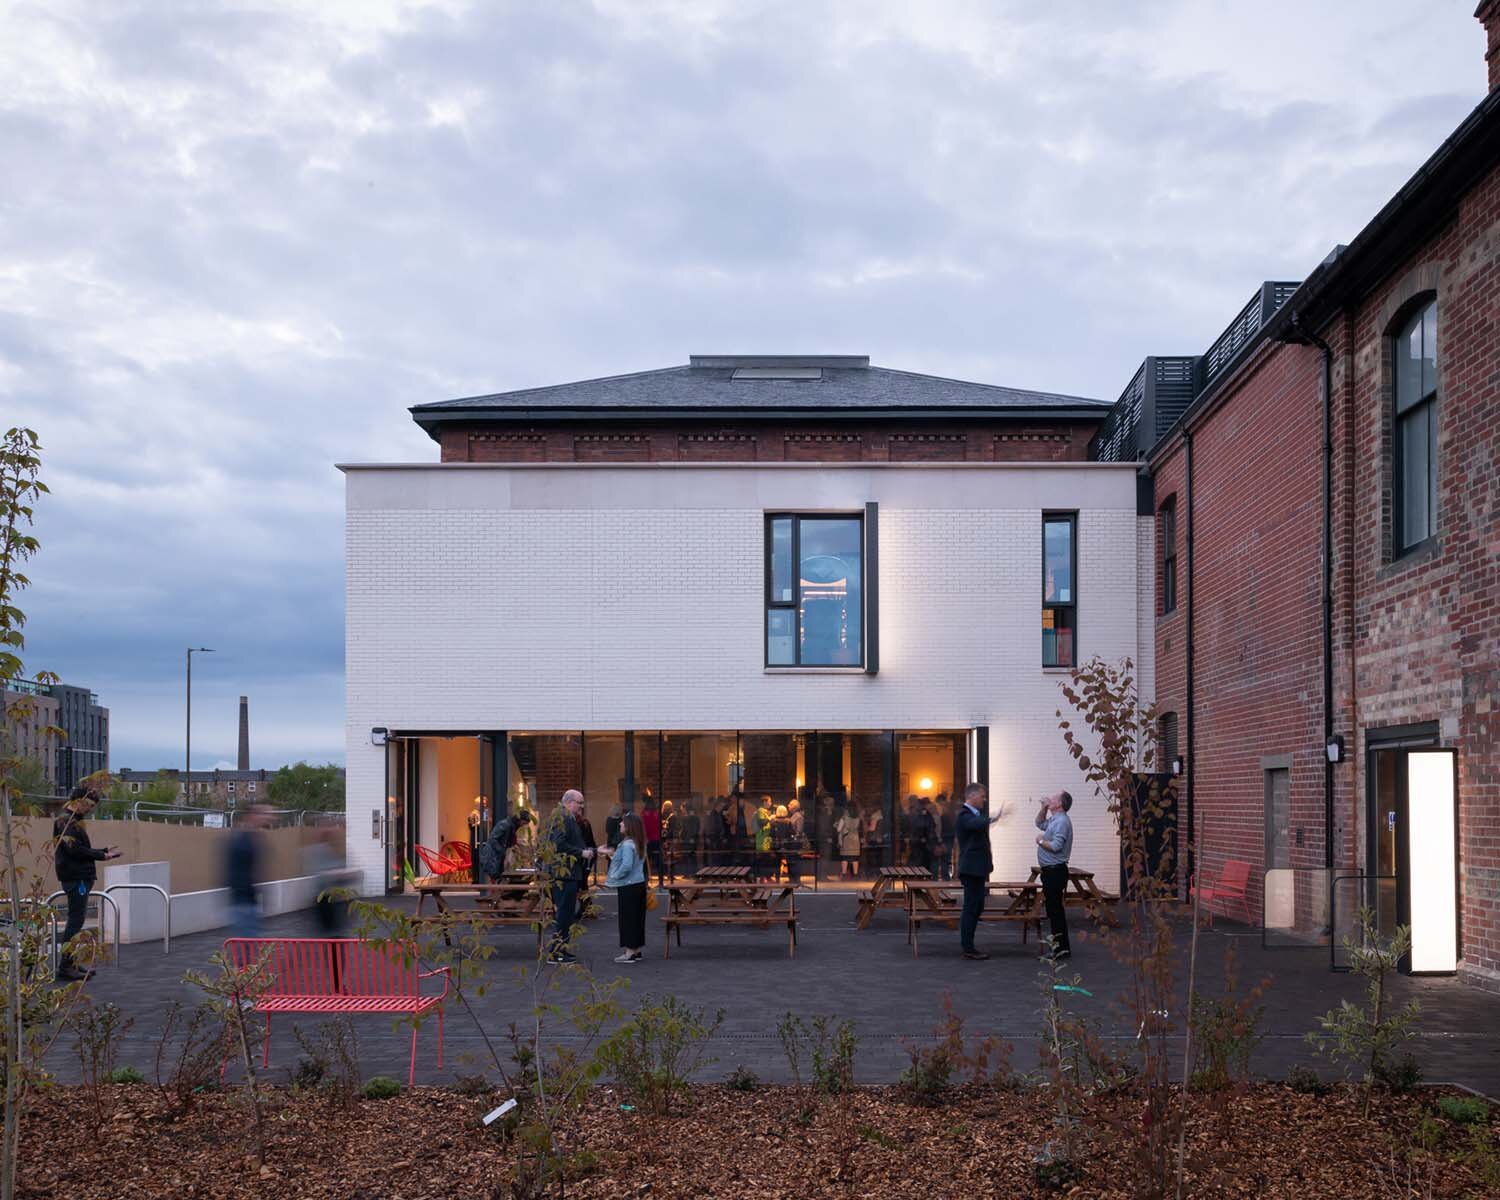 EAA-edinburgh-architectural-association-scotland-uk-awards-2020-Page-Park-Architects-Rear extension and courtyard.jpg